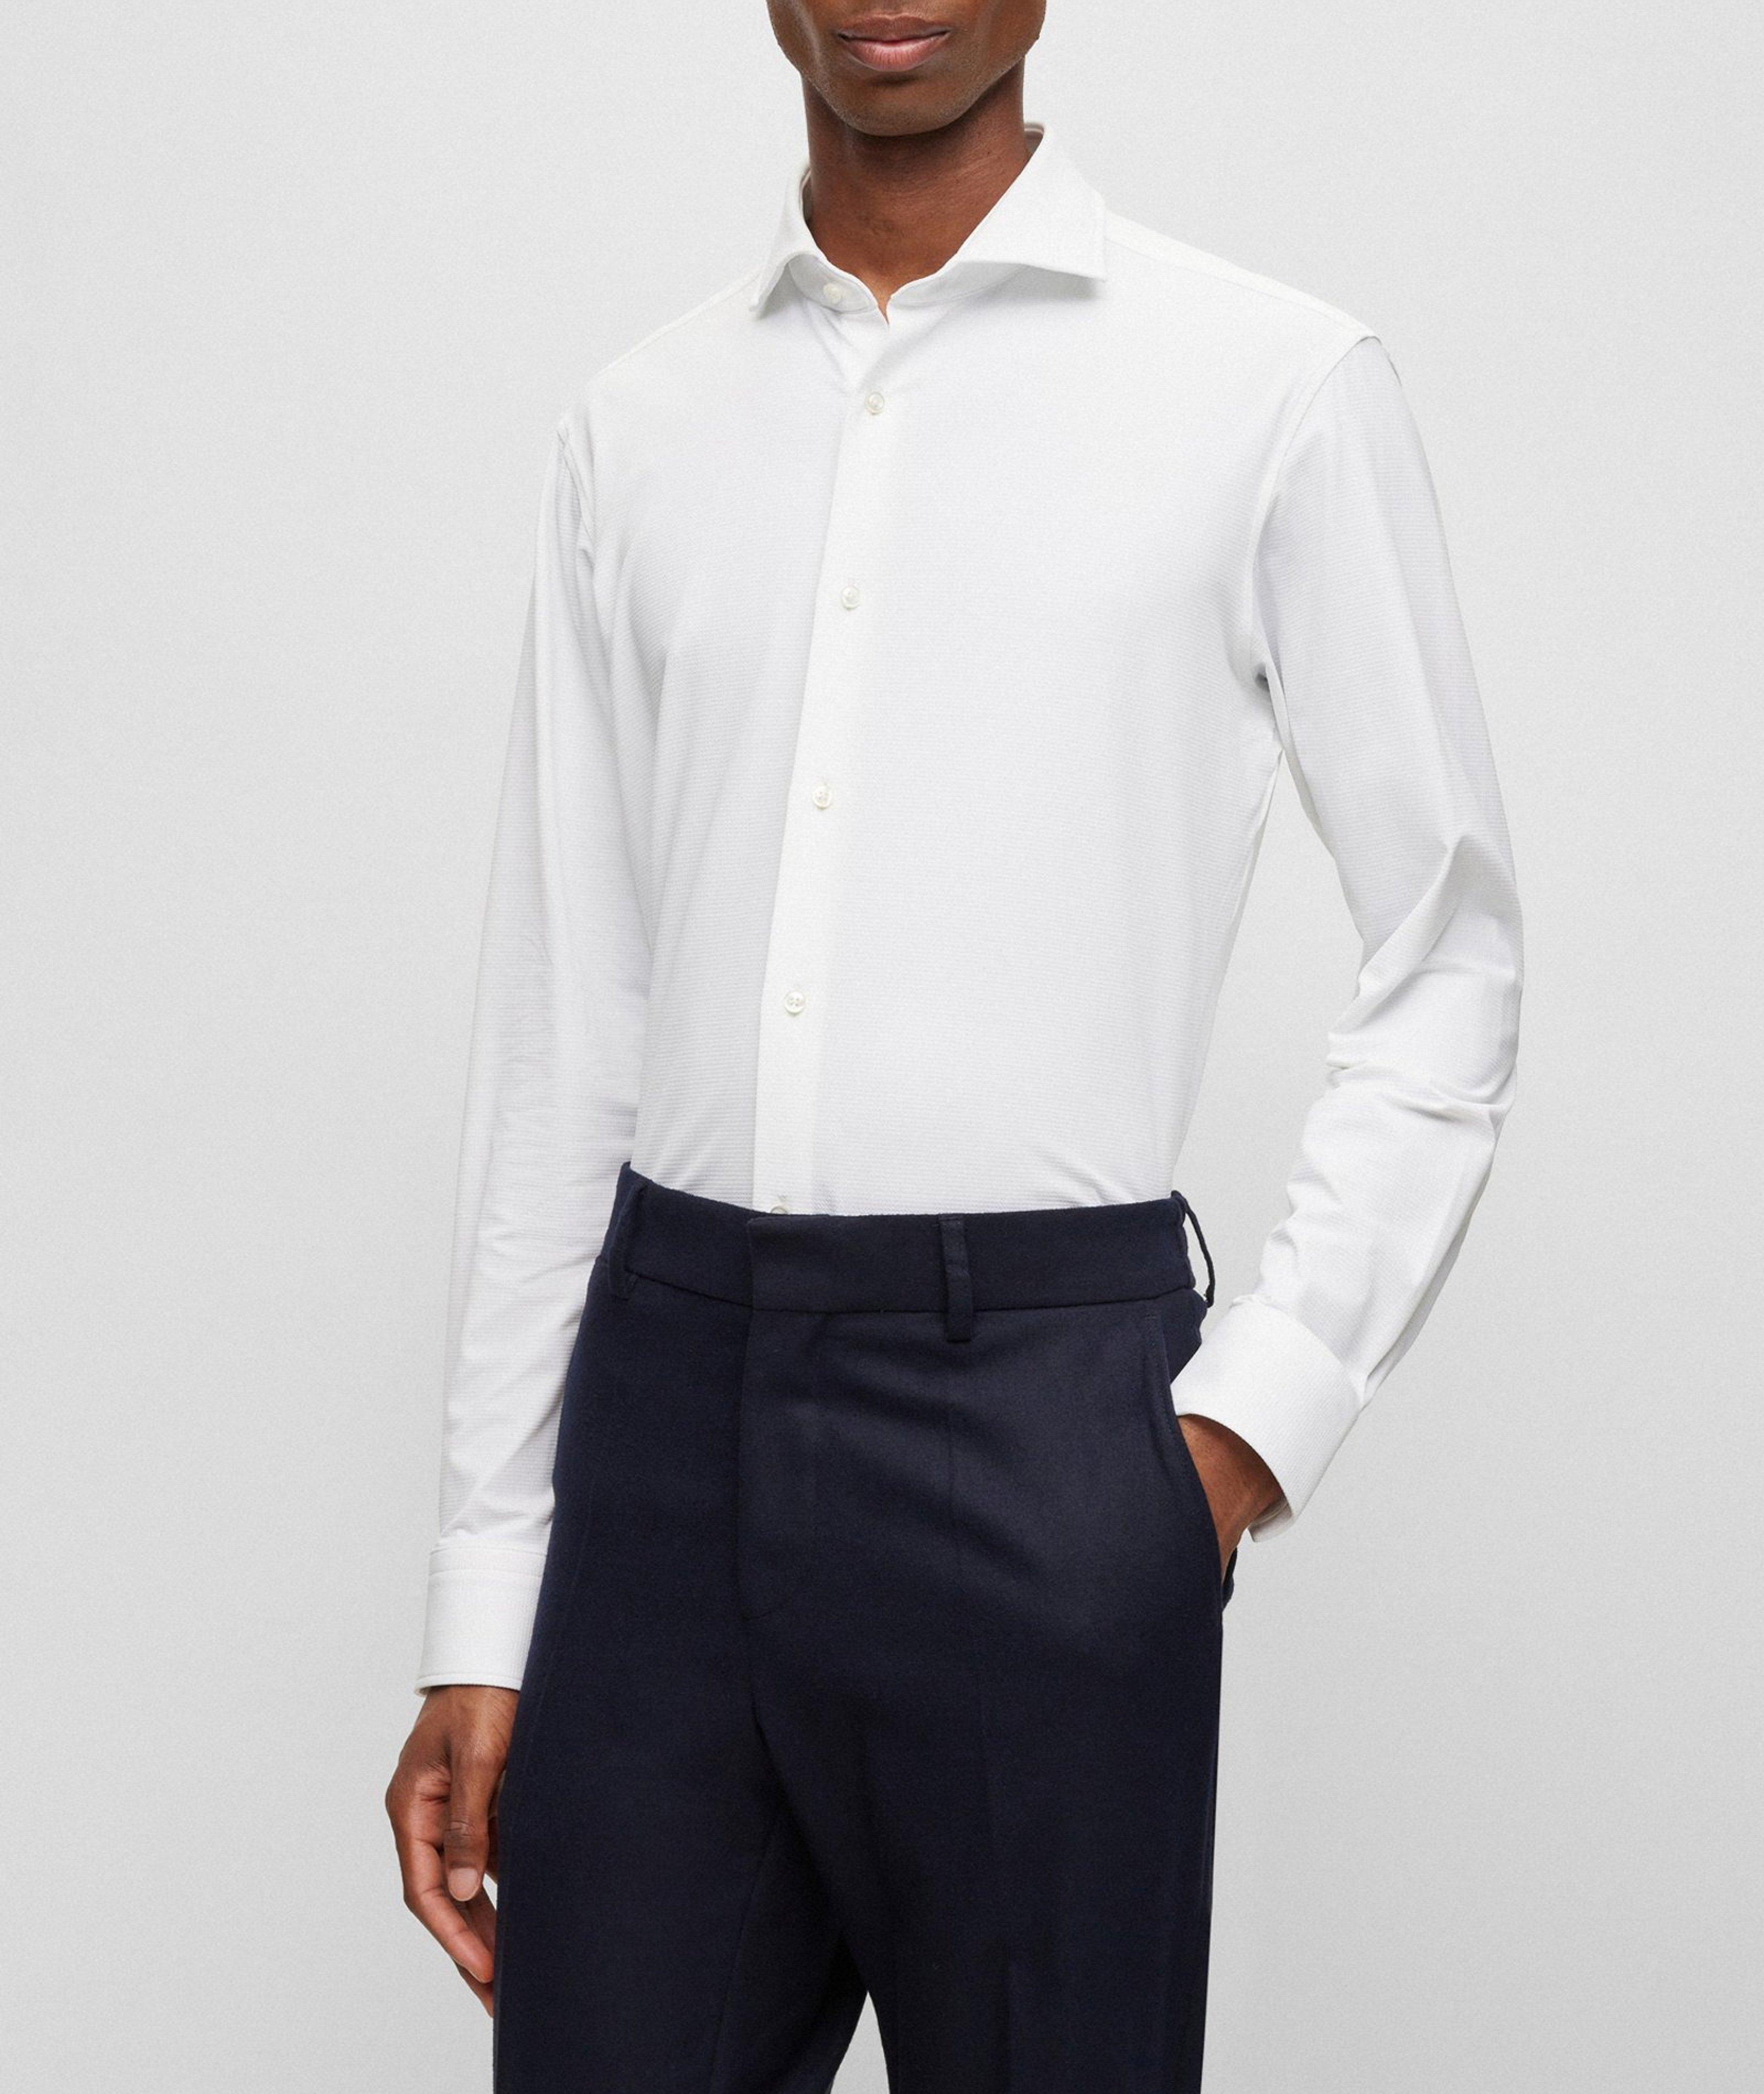 Structured Stretch-Fabric Dress Shirt image 1